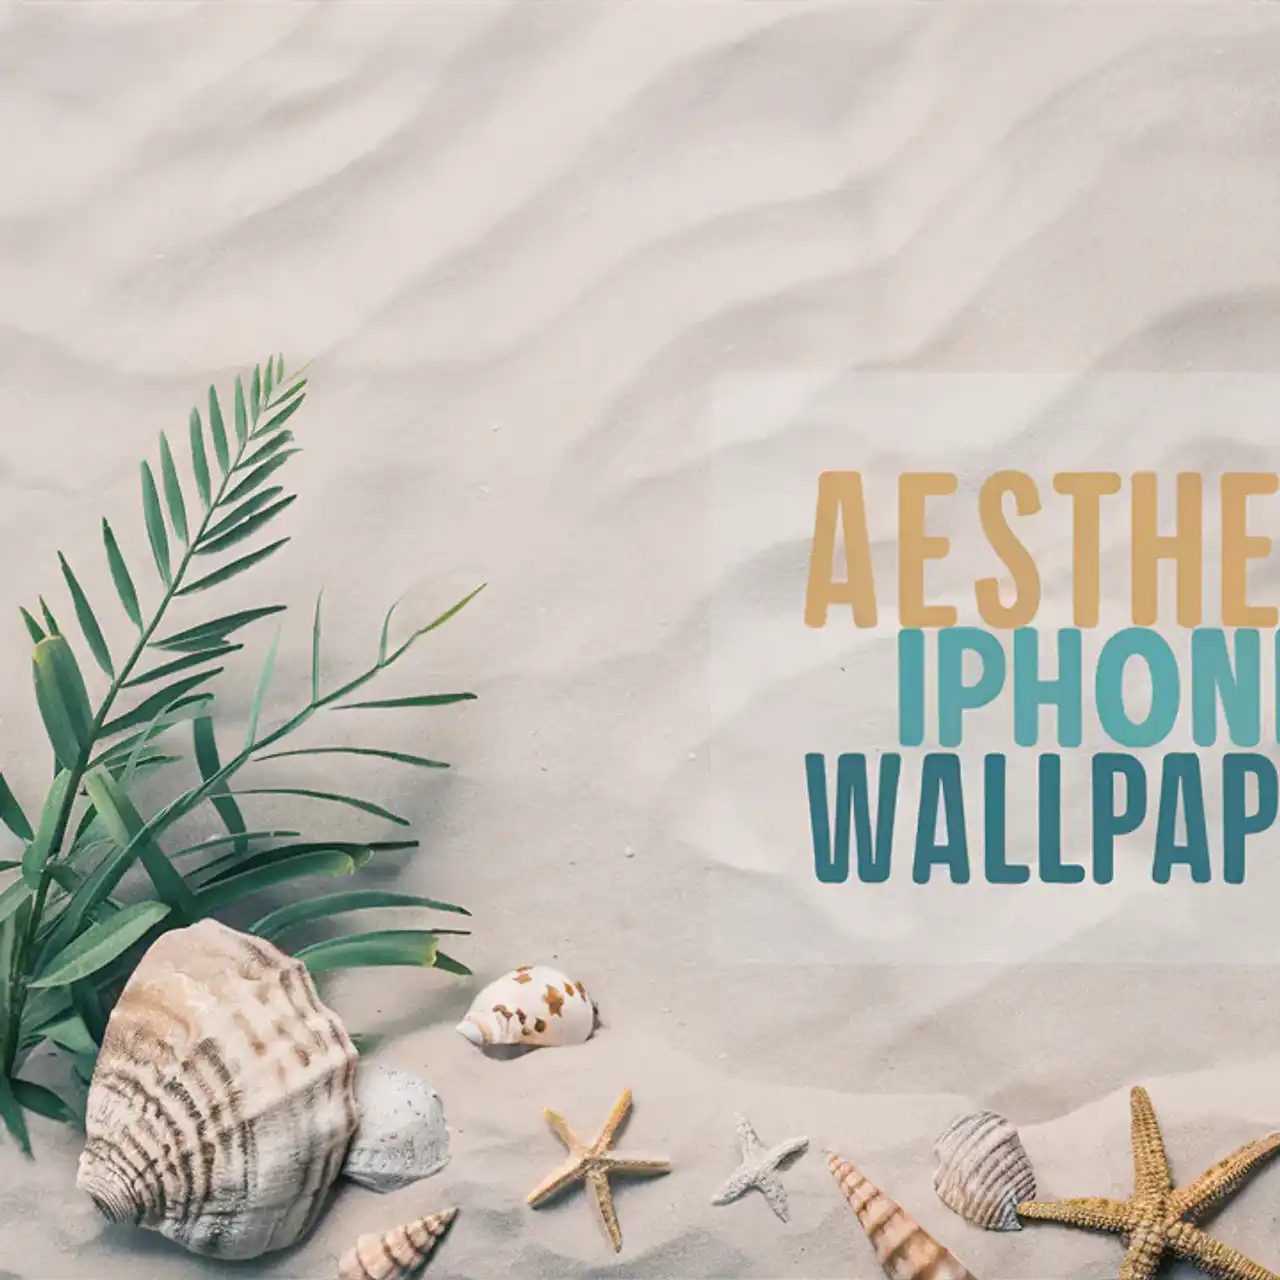 20+ Aesthetic iPhone Wallpapers for Every Mood - iPhone and Android